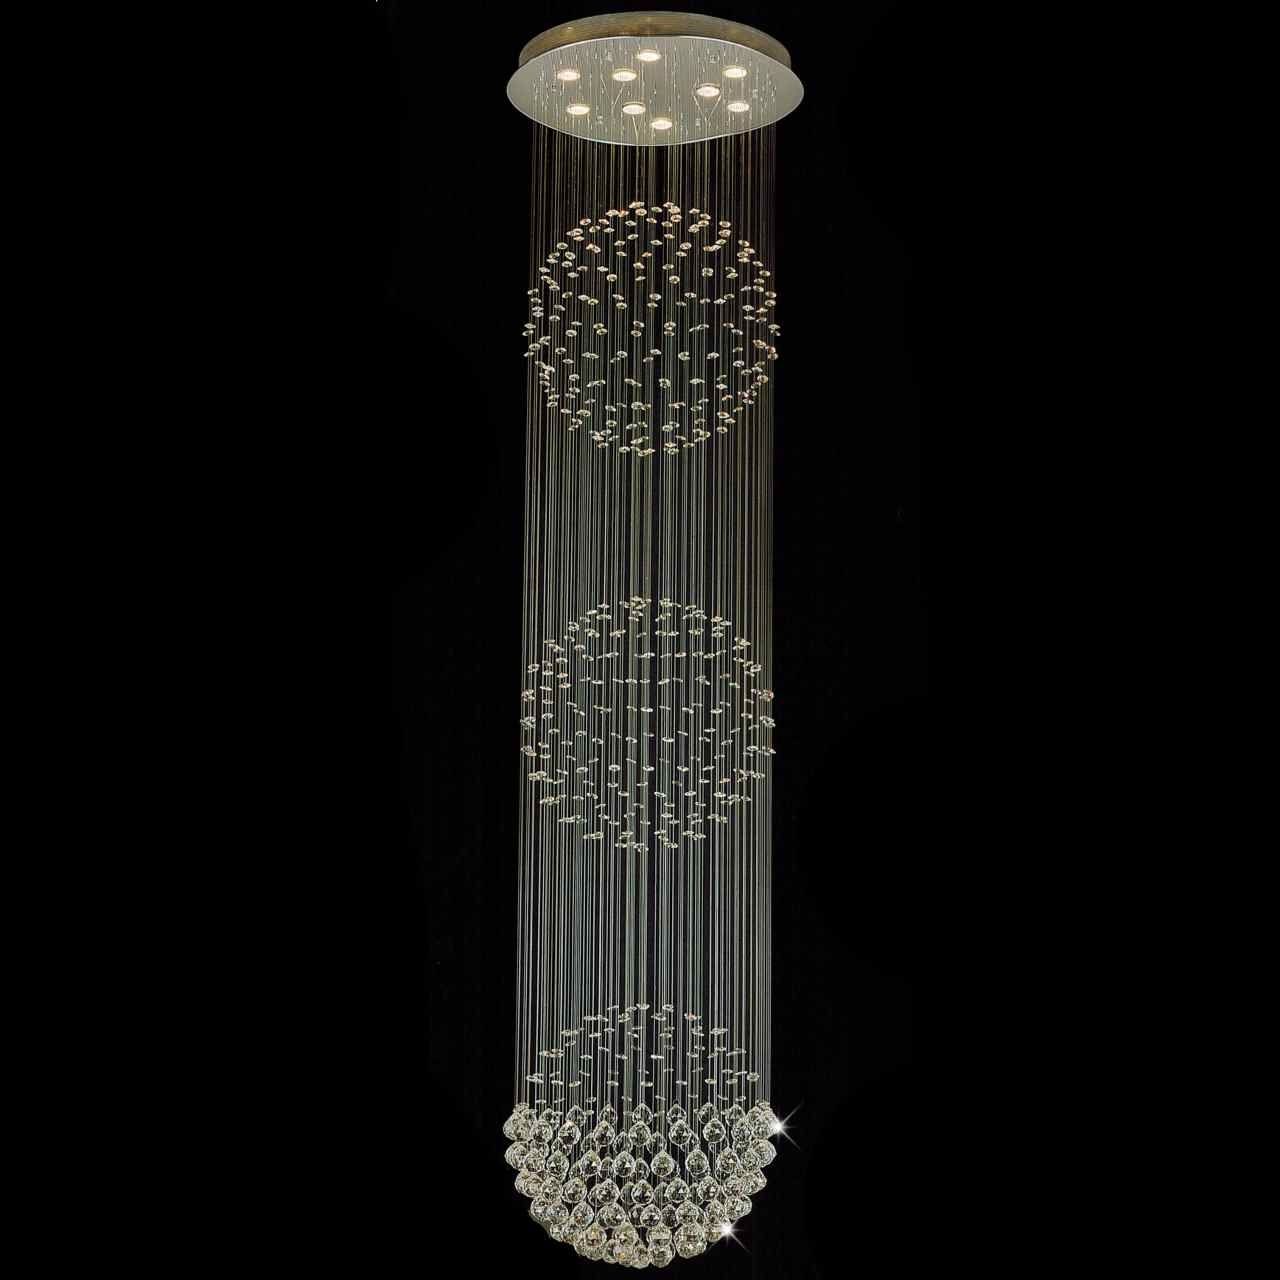 Best And Newest Brizzo Lighting Stores. Triple Sphere Modern Foyer Crystal Intended For Wall Mounted Chandelier Lighting (Photo 13 of 15)